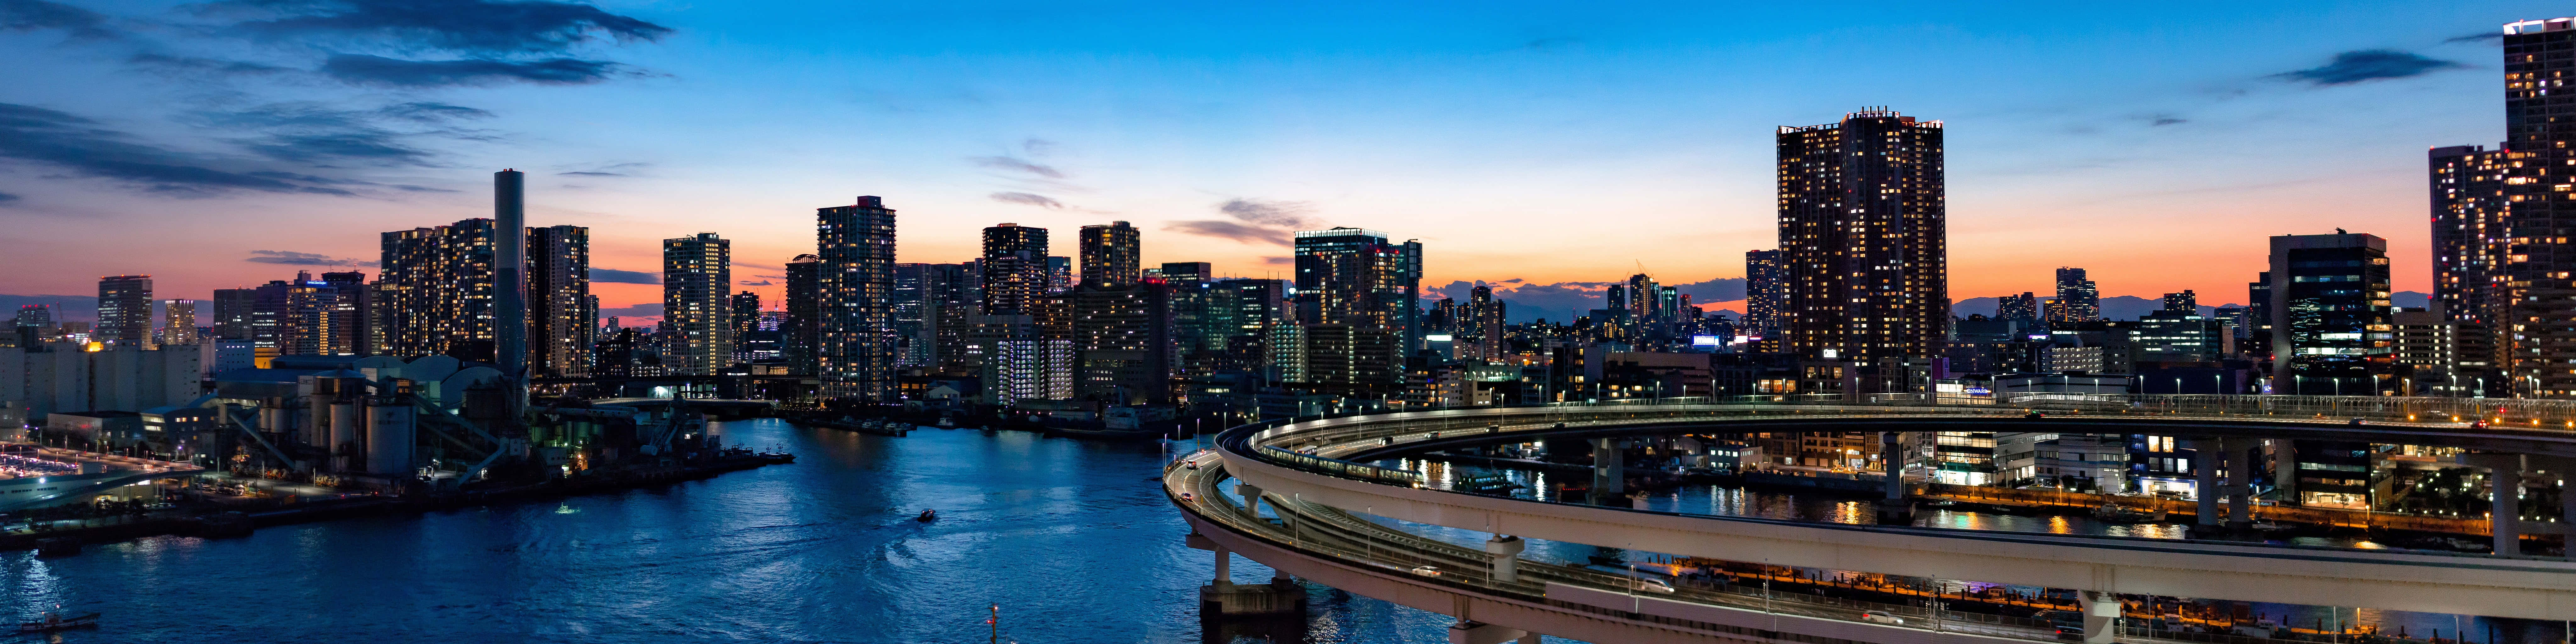 A Cityscape With Bridges And Buildings At Dusk Wallpaper